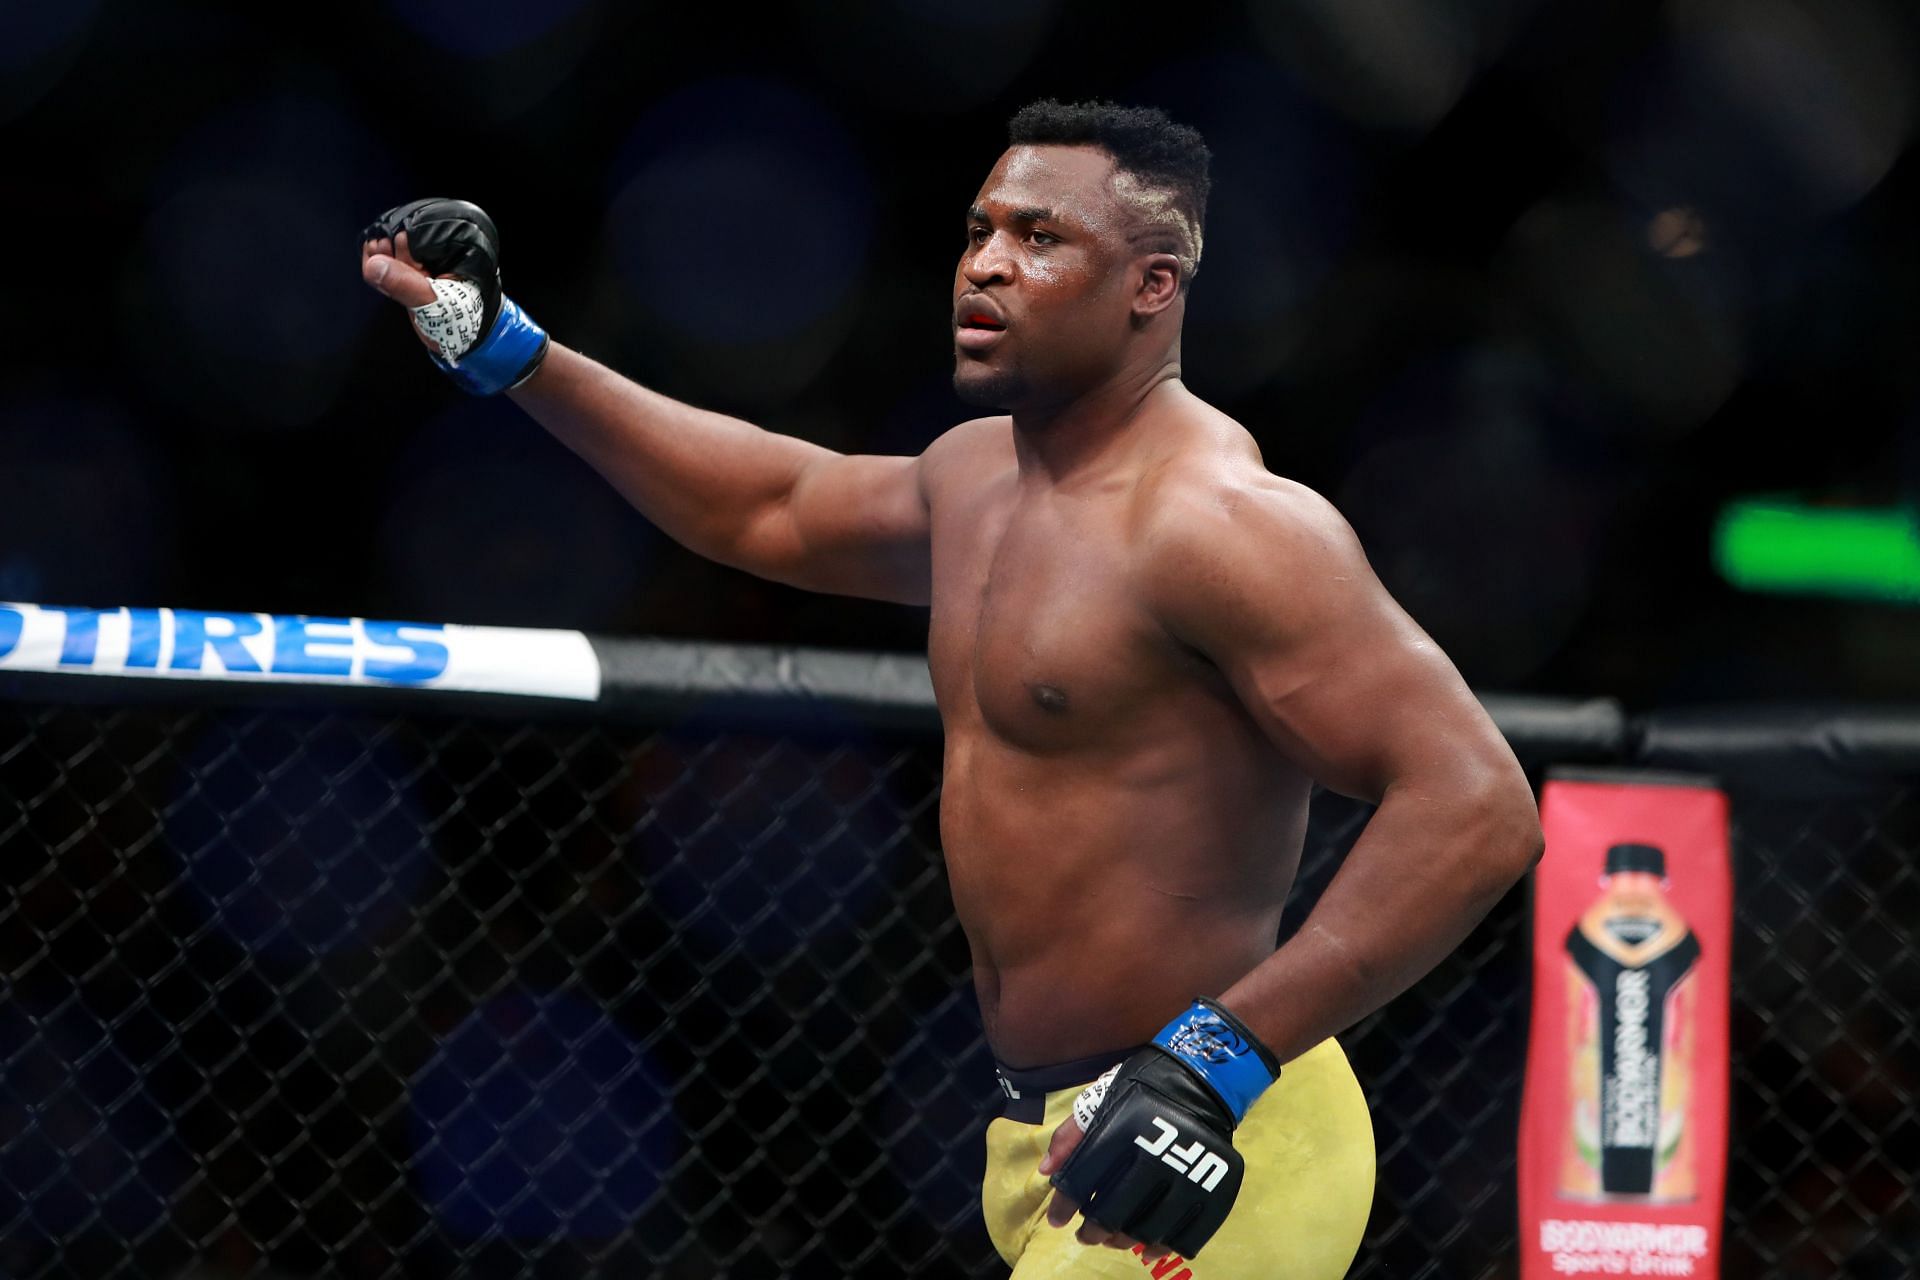 Francis Ngannou revealed the injuries to his knee prior to the fight against Ciryl Gane at UFC 270